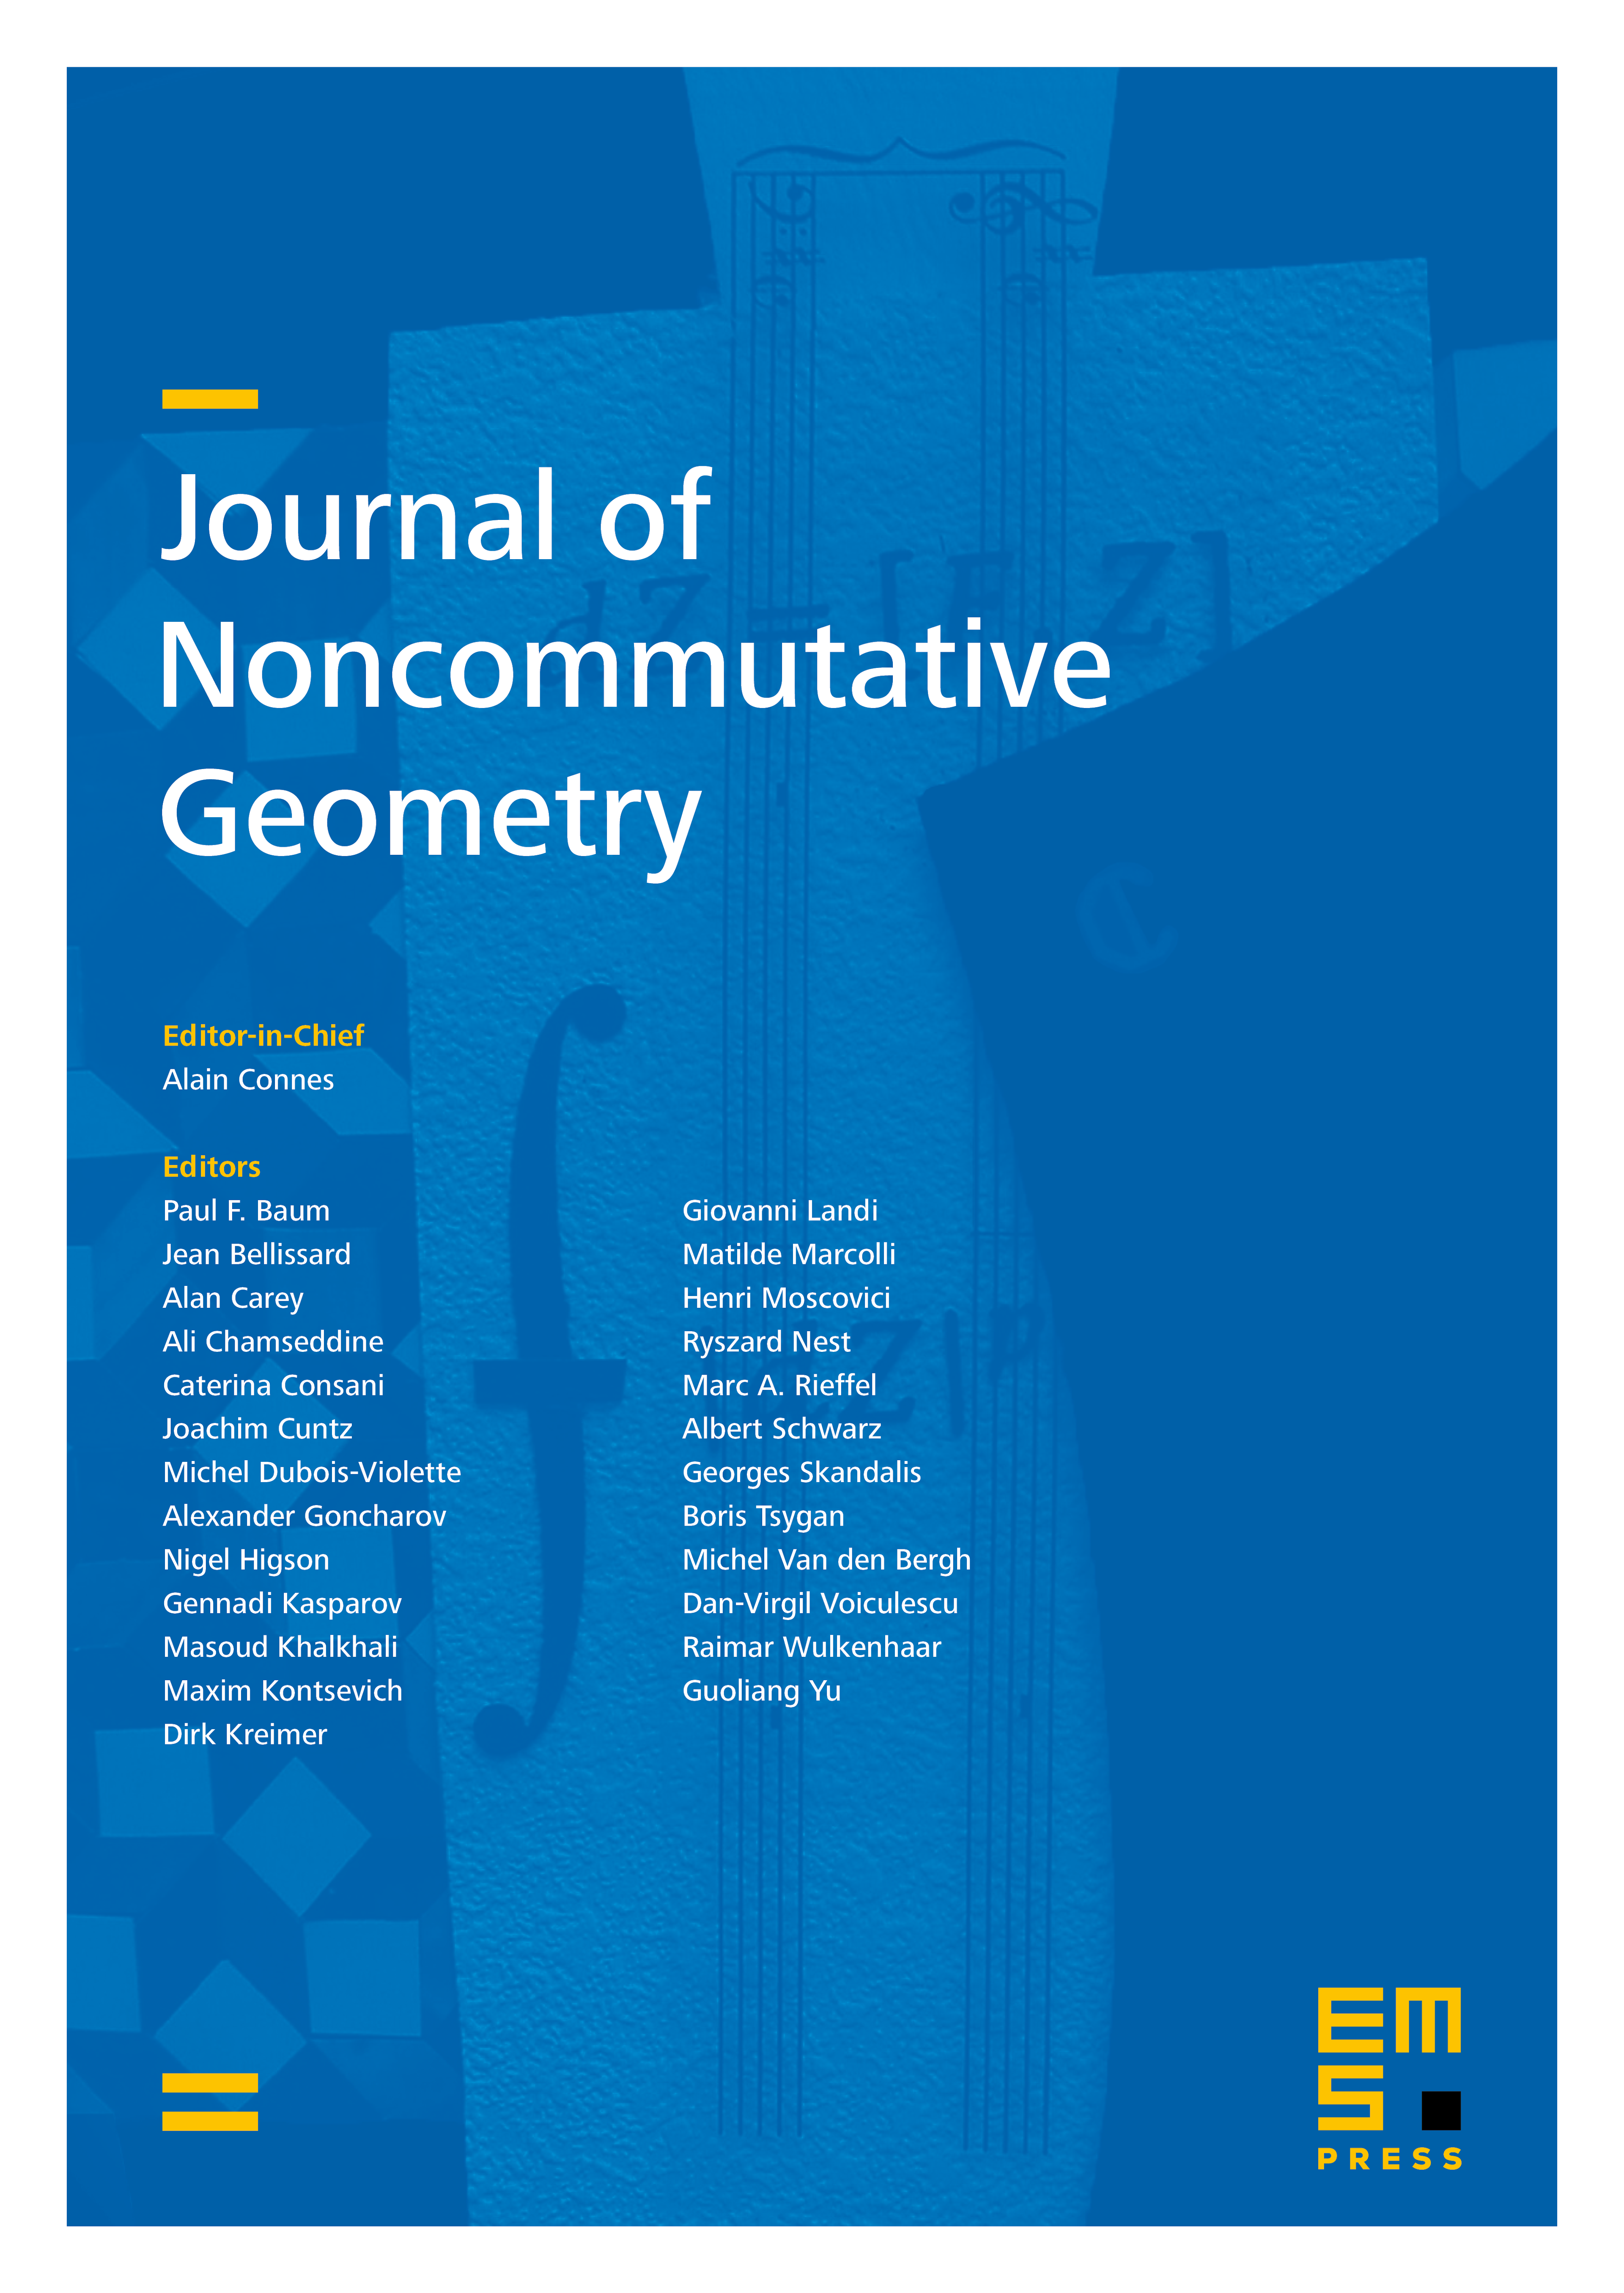 Conformal structures in noncommutative geometry cover